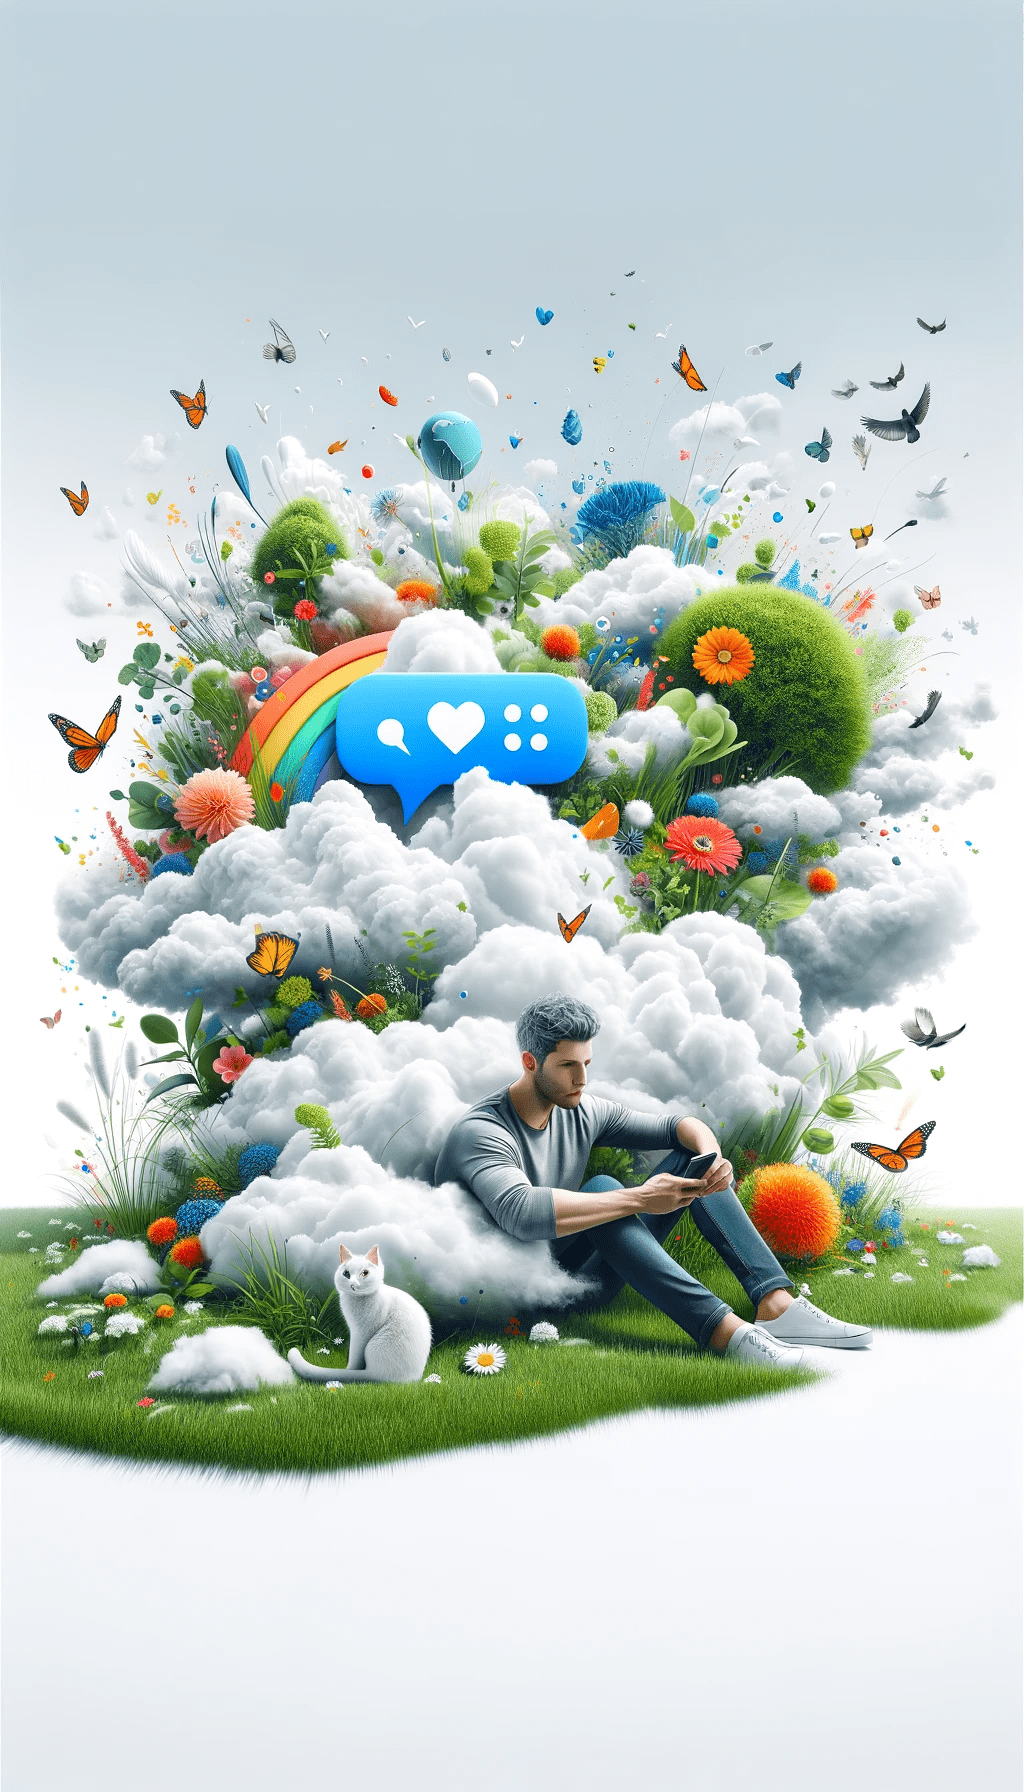 Man sitting on green grass using smartphone with a speech bubble, surrounded by colorful flowers, with a cat, butterflies, and birds against a pure white background with white clouds